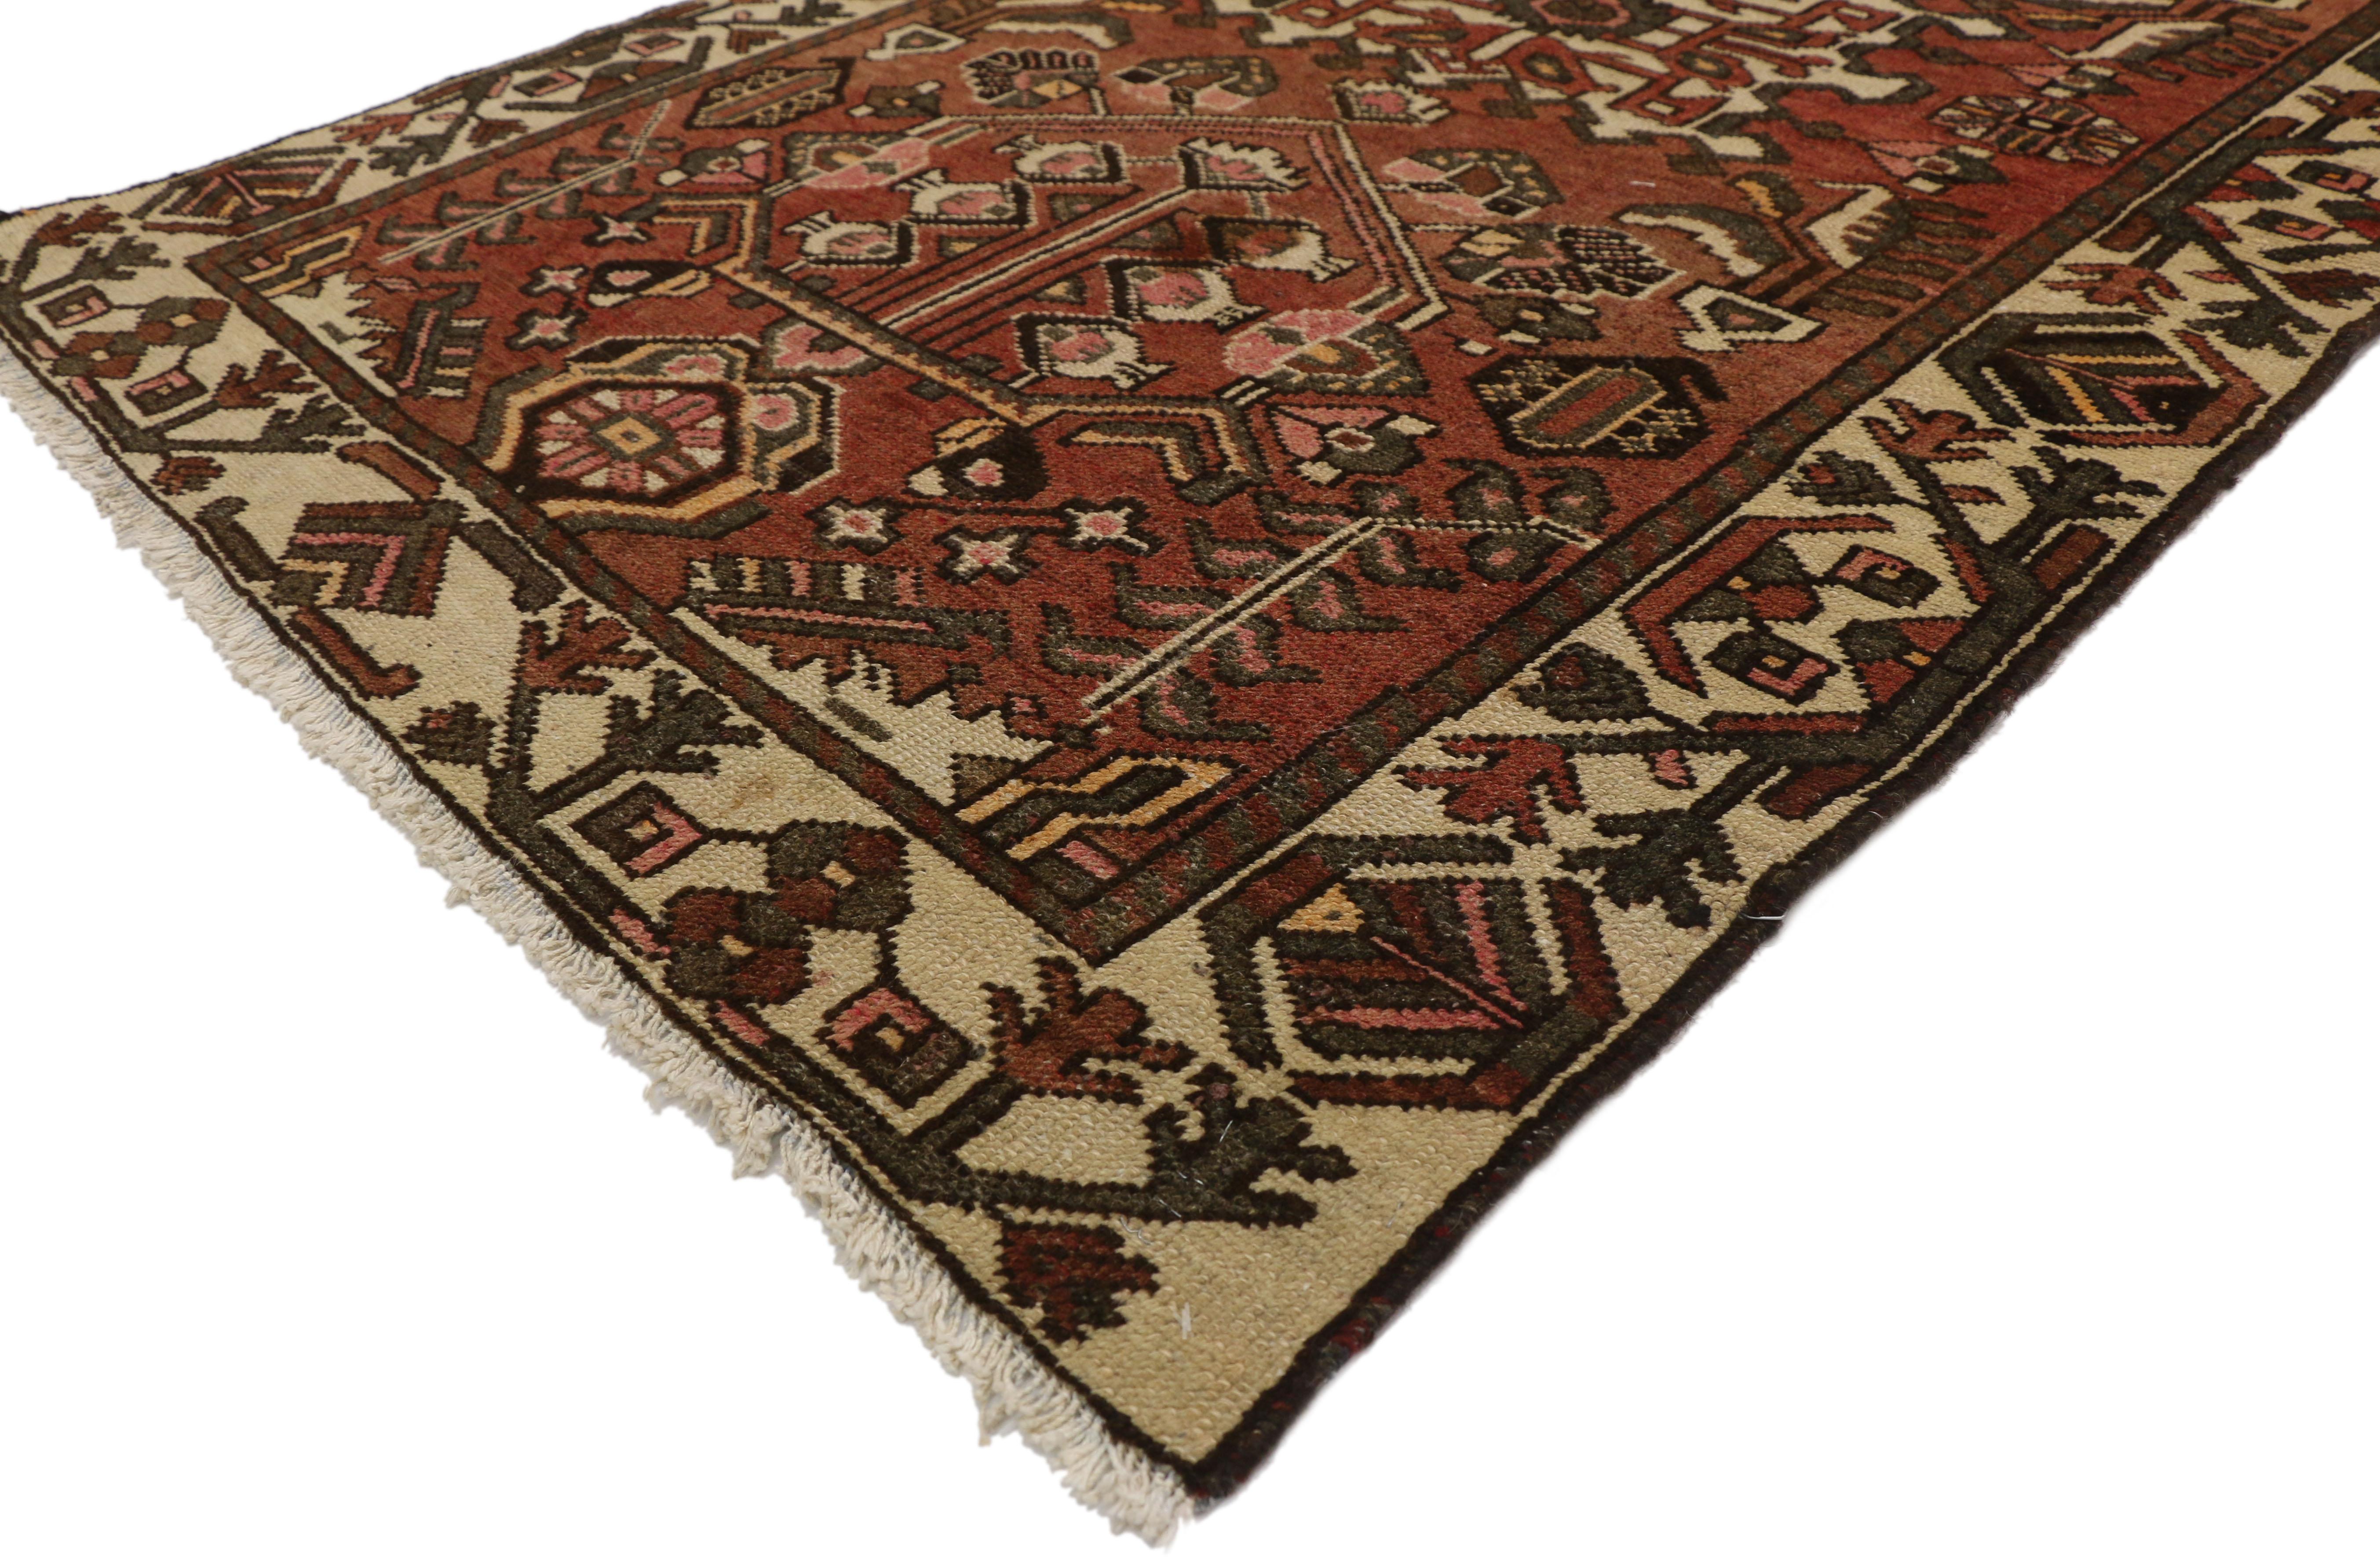 75278, vintage Persian Bakhtiari rug with Mid-Century Modern style. With its bold geometric pattern and angular designs, this hand-knotted wool vintage Persian Bakhtiari rug embodies Art Deco and Mid-Century Modern style. It features a center square